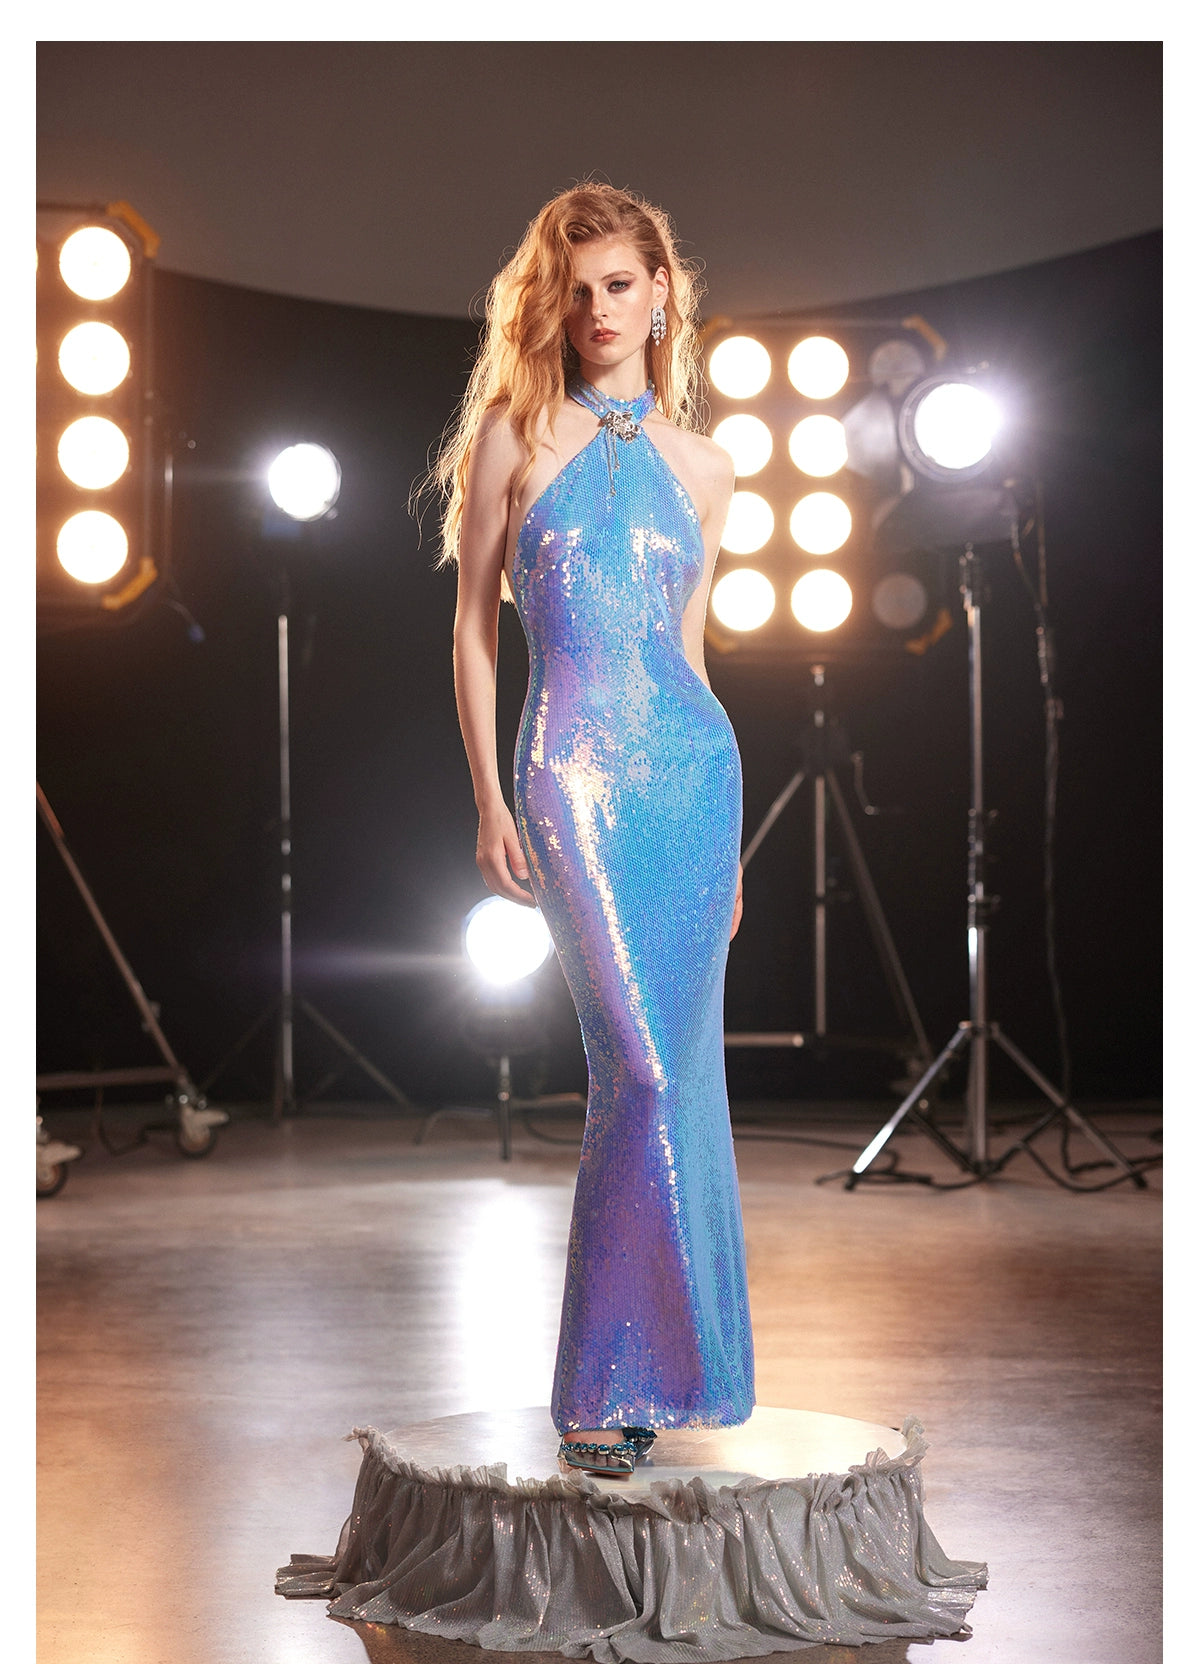 Sheer Luck Elodie Backless Sequin Bodycon Dress - CHINASQUAD